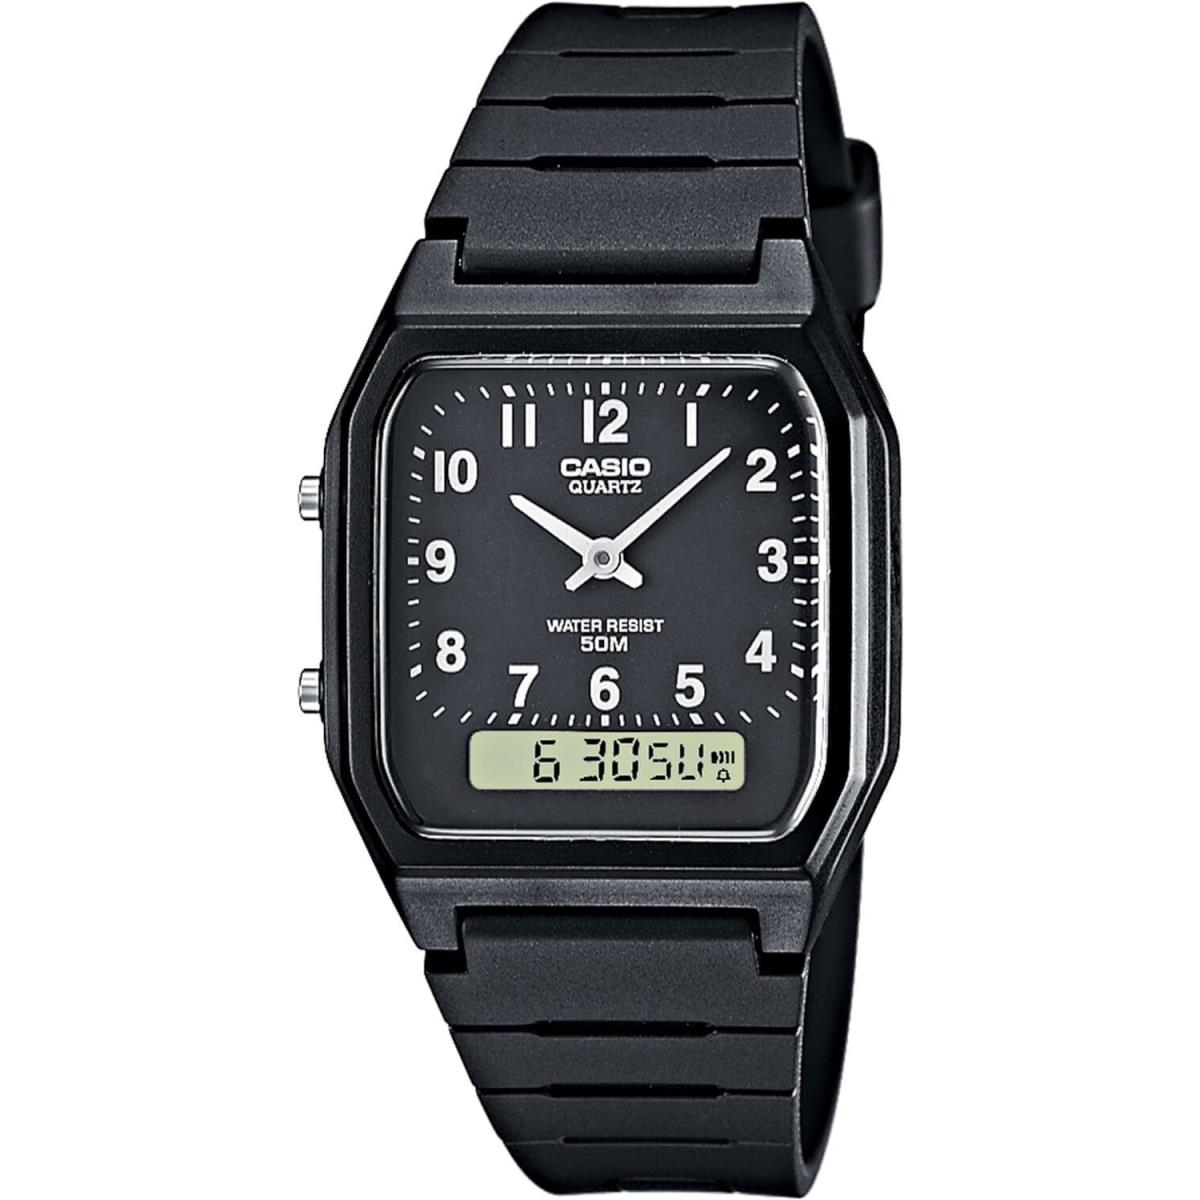 Unisex Casio AW-48H-1BV Watch in Black with a Digital Display and a Numbered